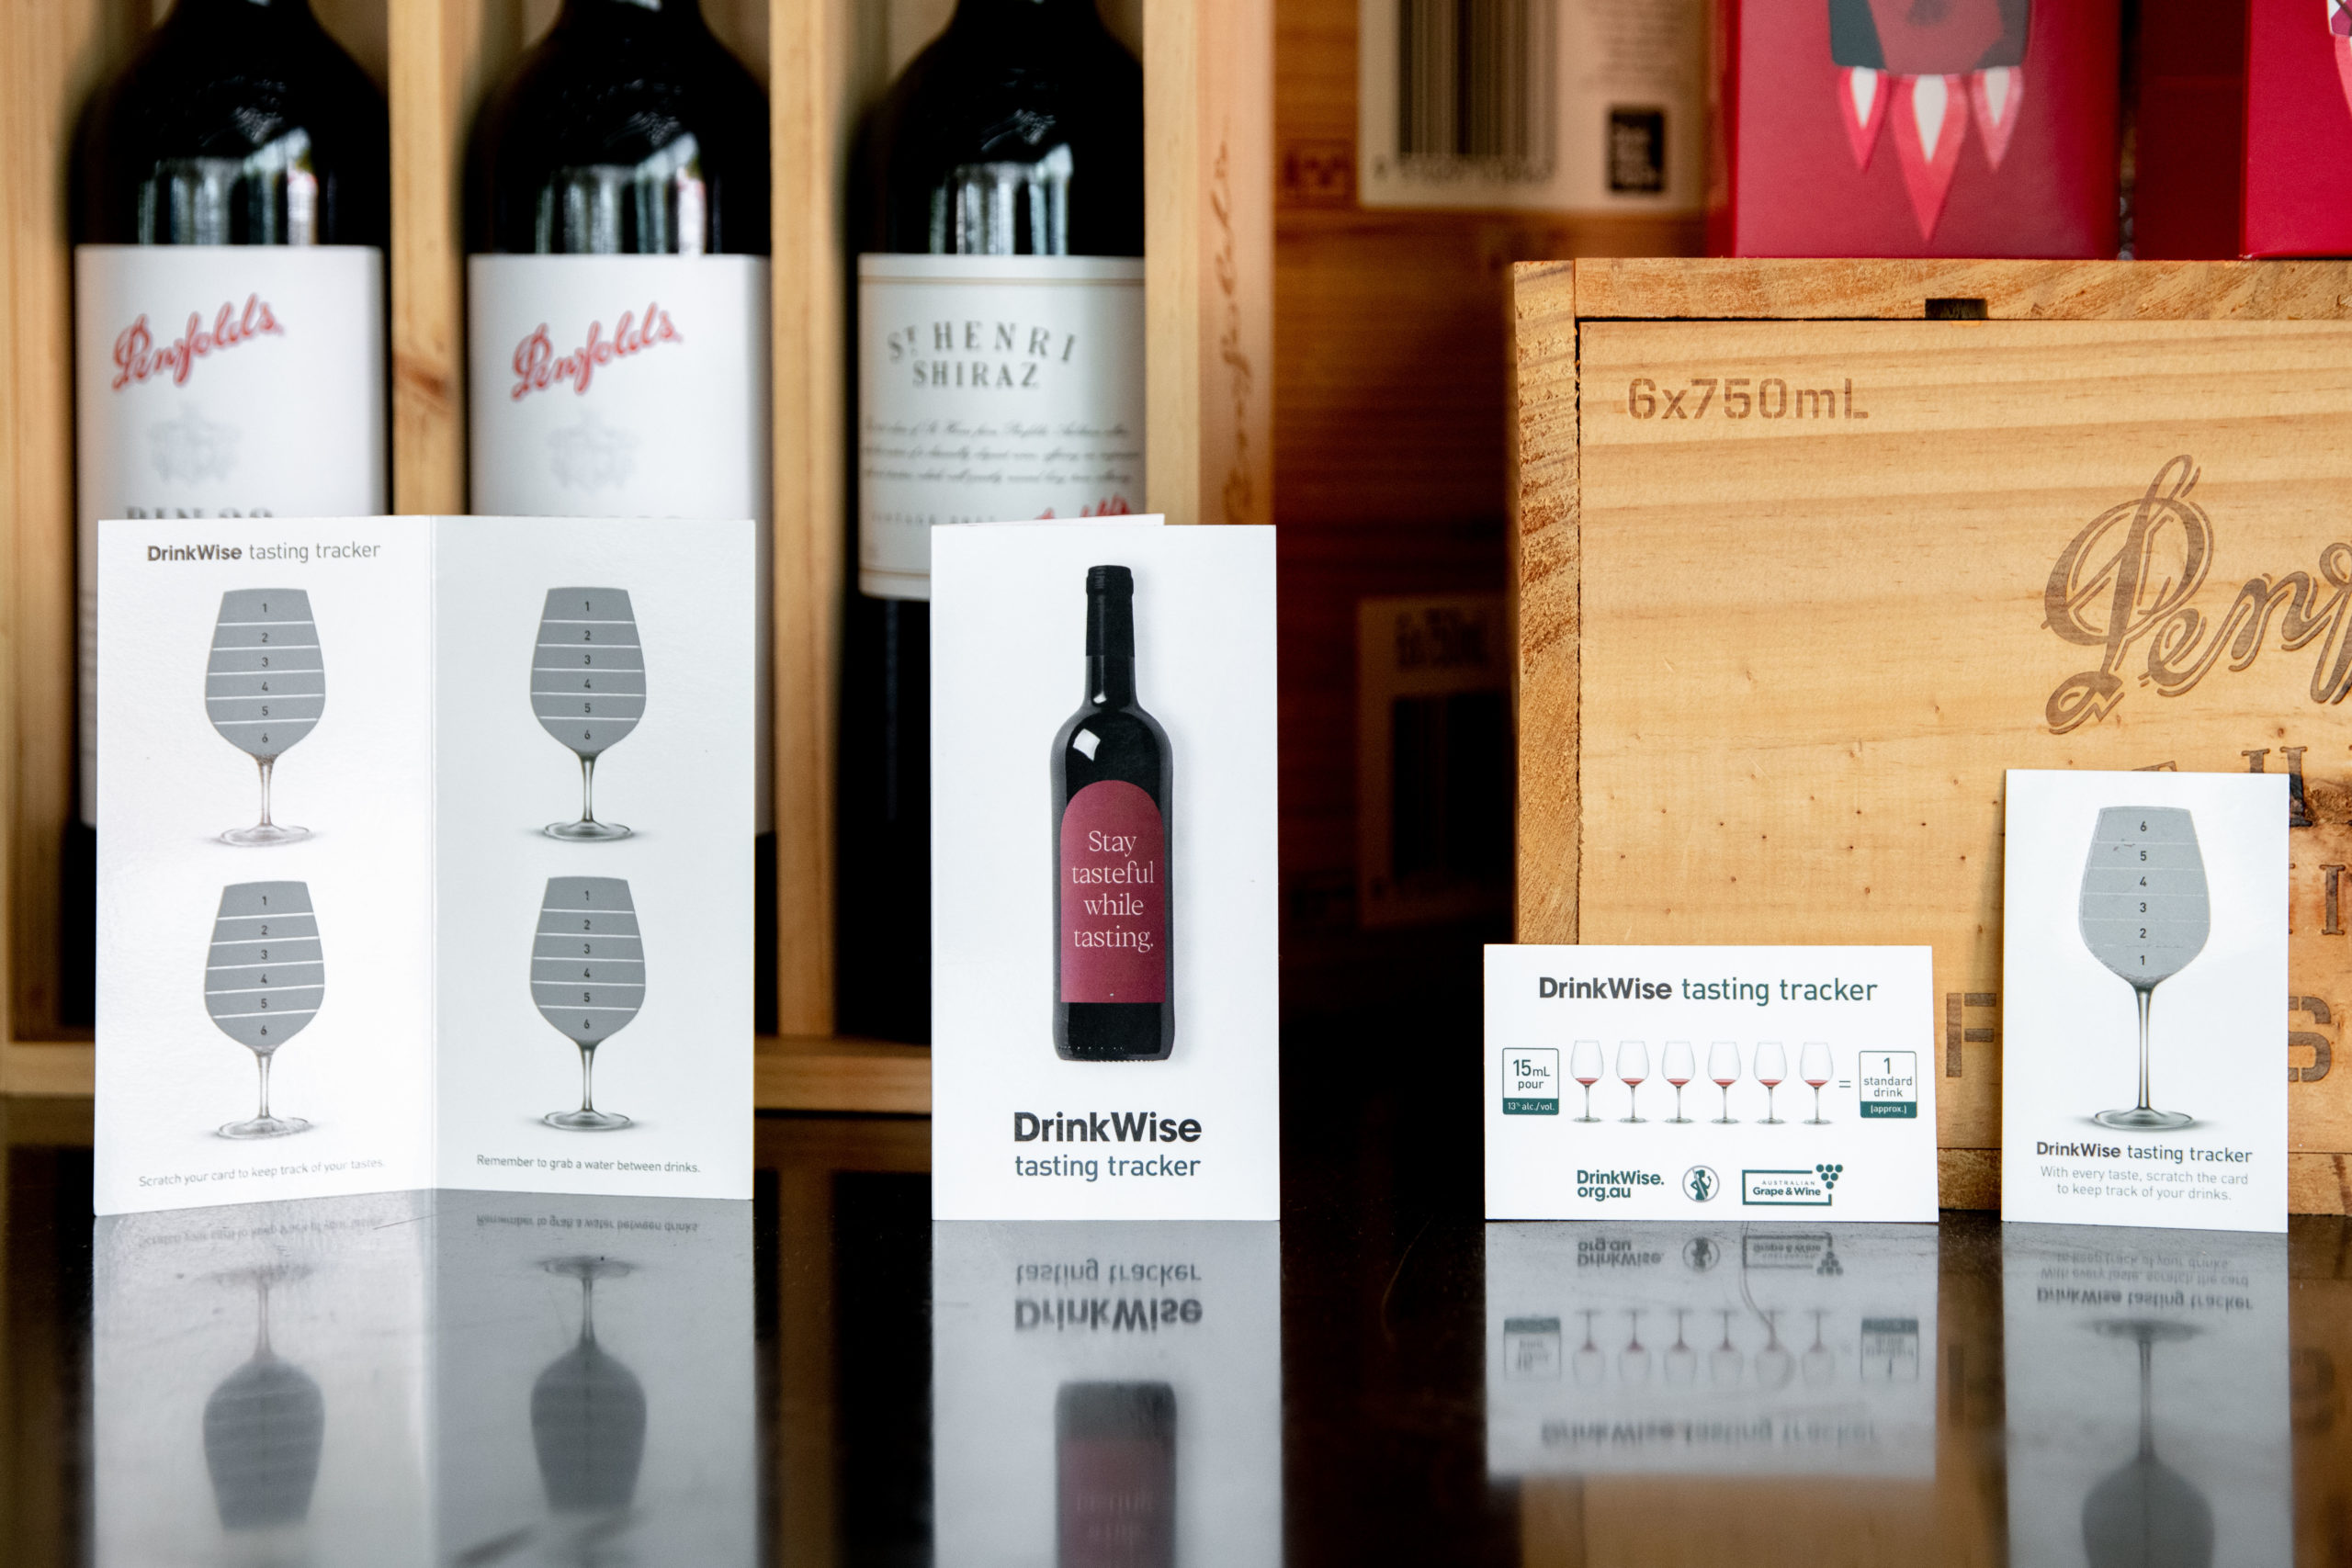 Stay tasteful while tasting scartchie cards for festivals and cellar doors